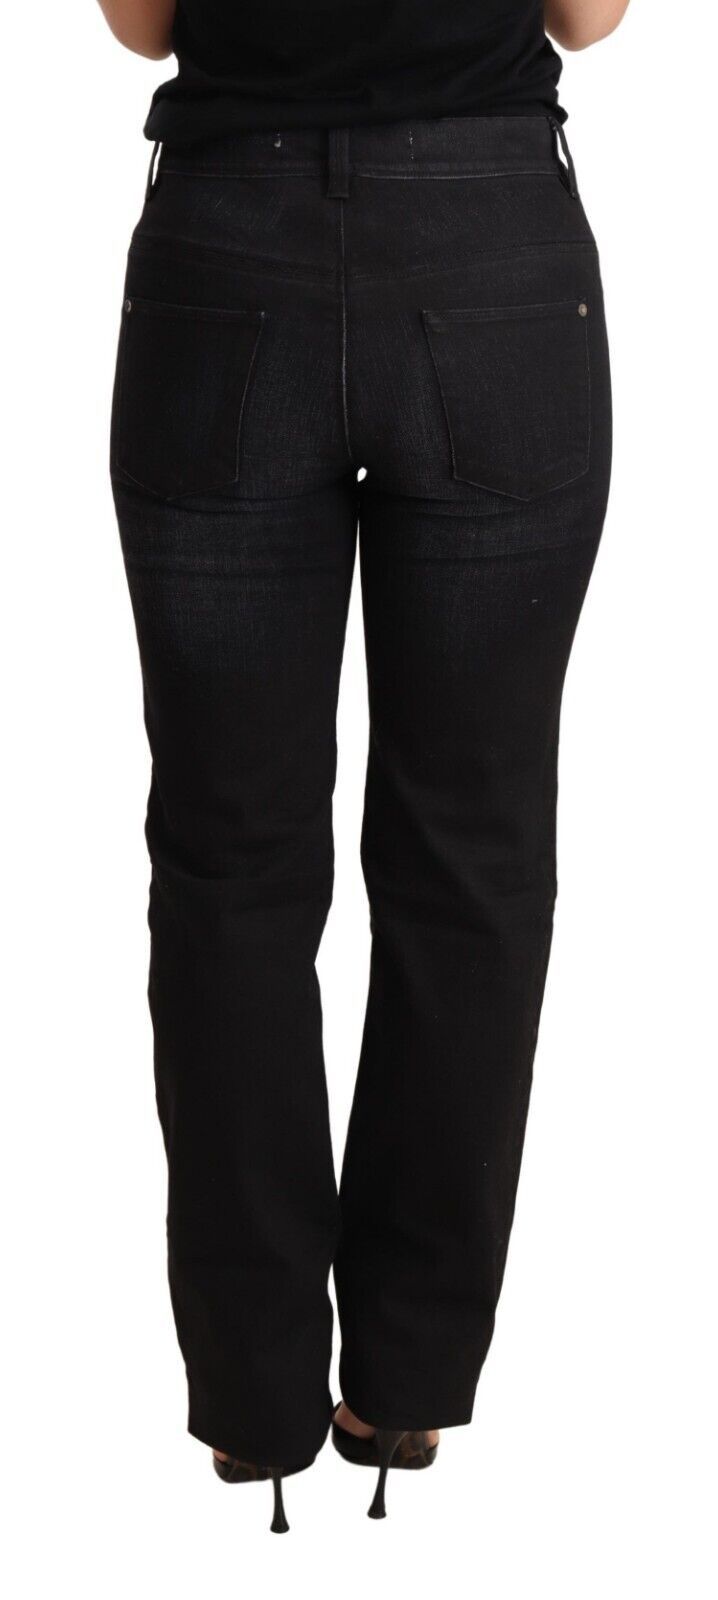 Chic Black Washed Straight Cut Jeans